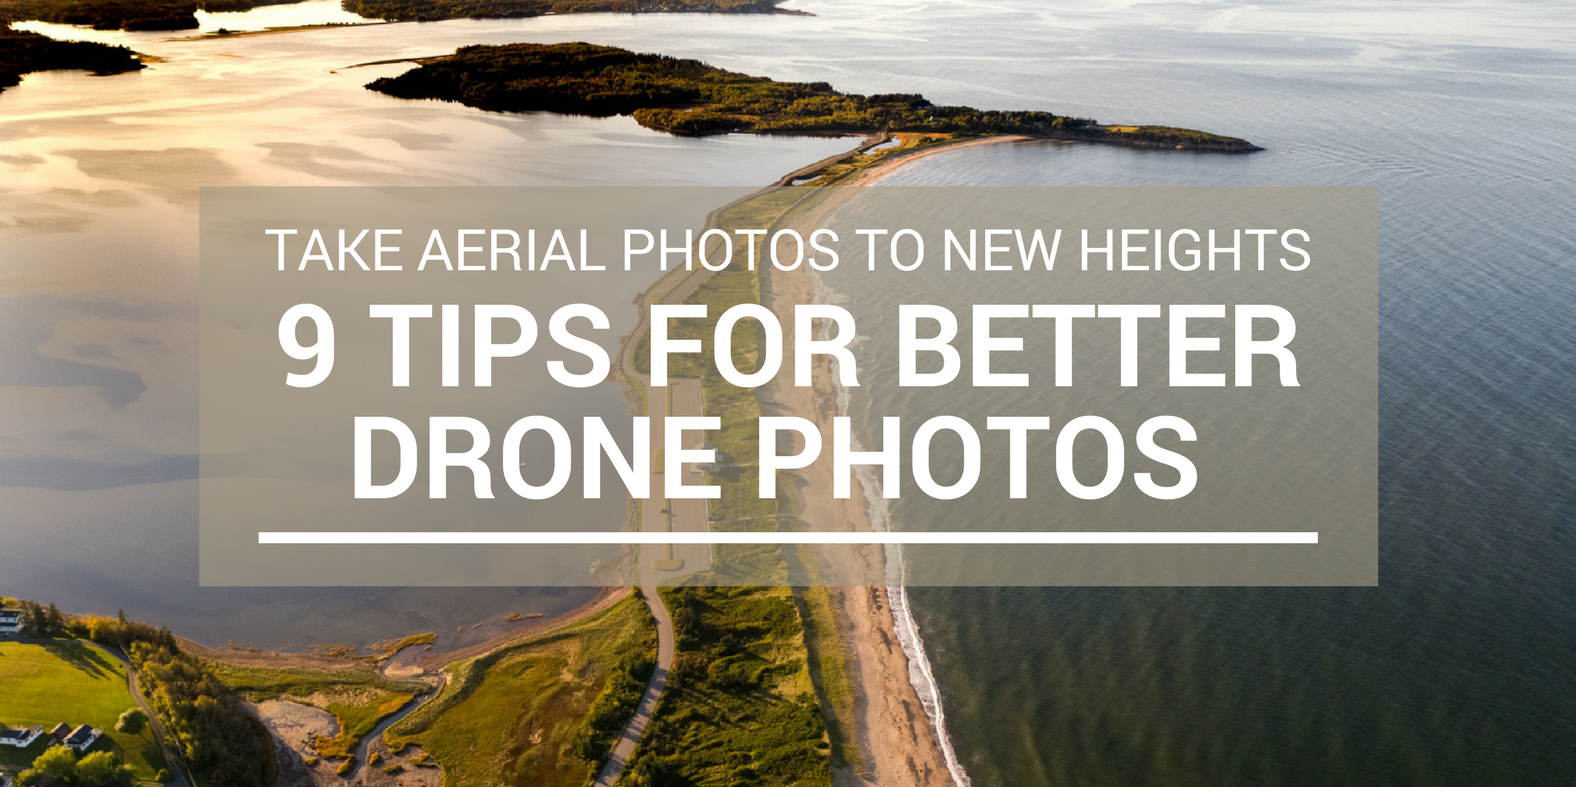 Drone Photography Tips: How to Take Your Aerial Photos to New Heights